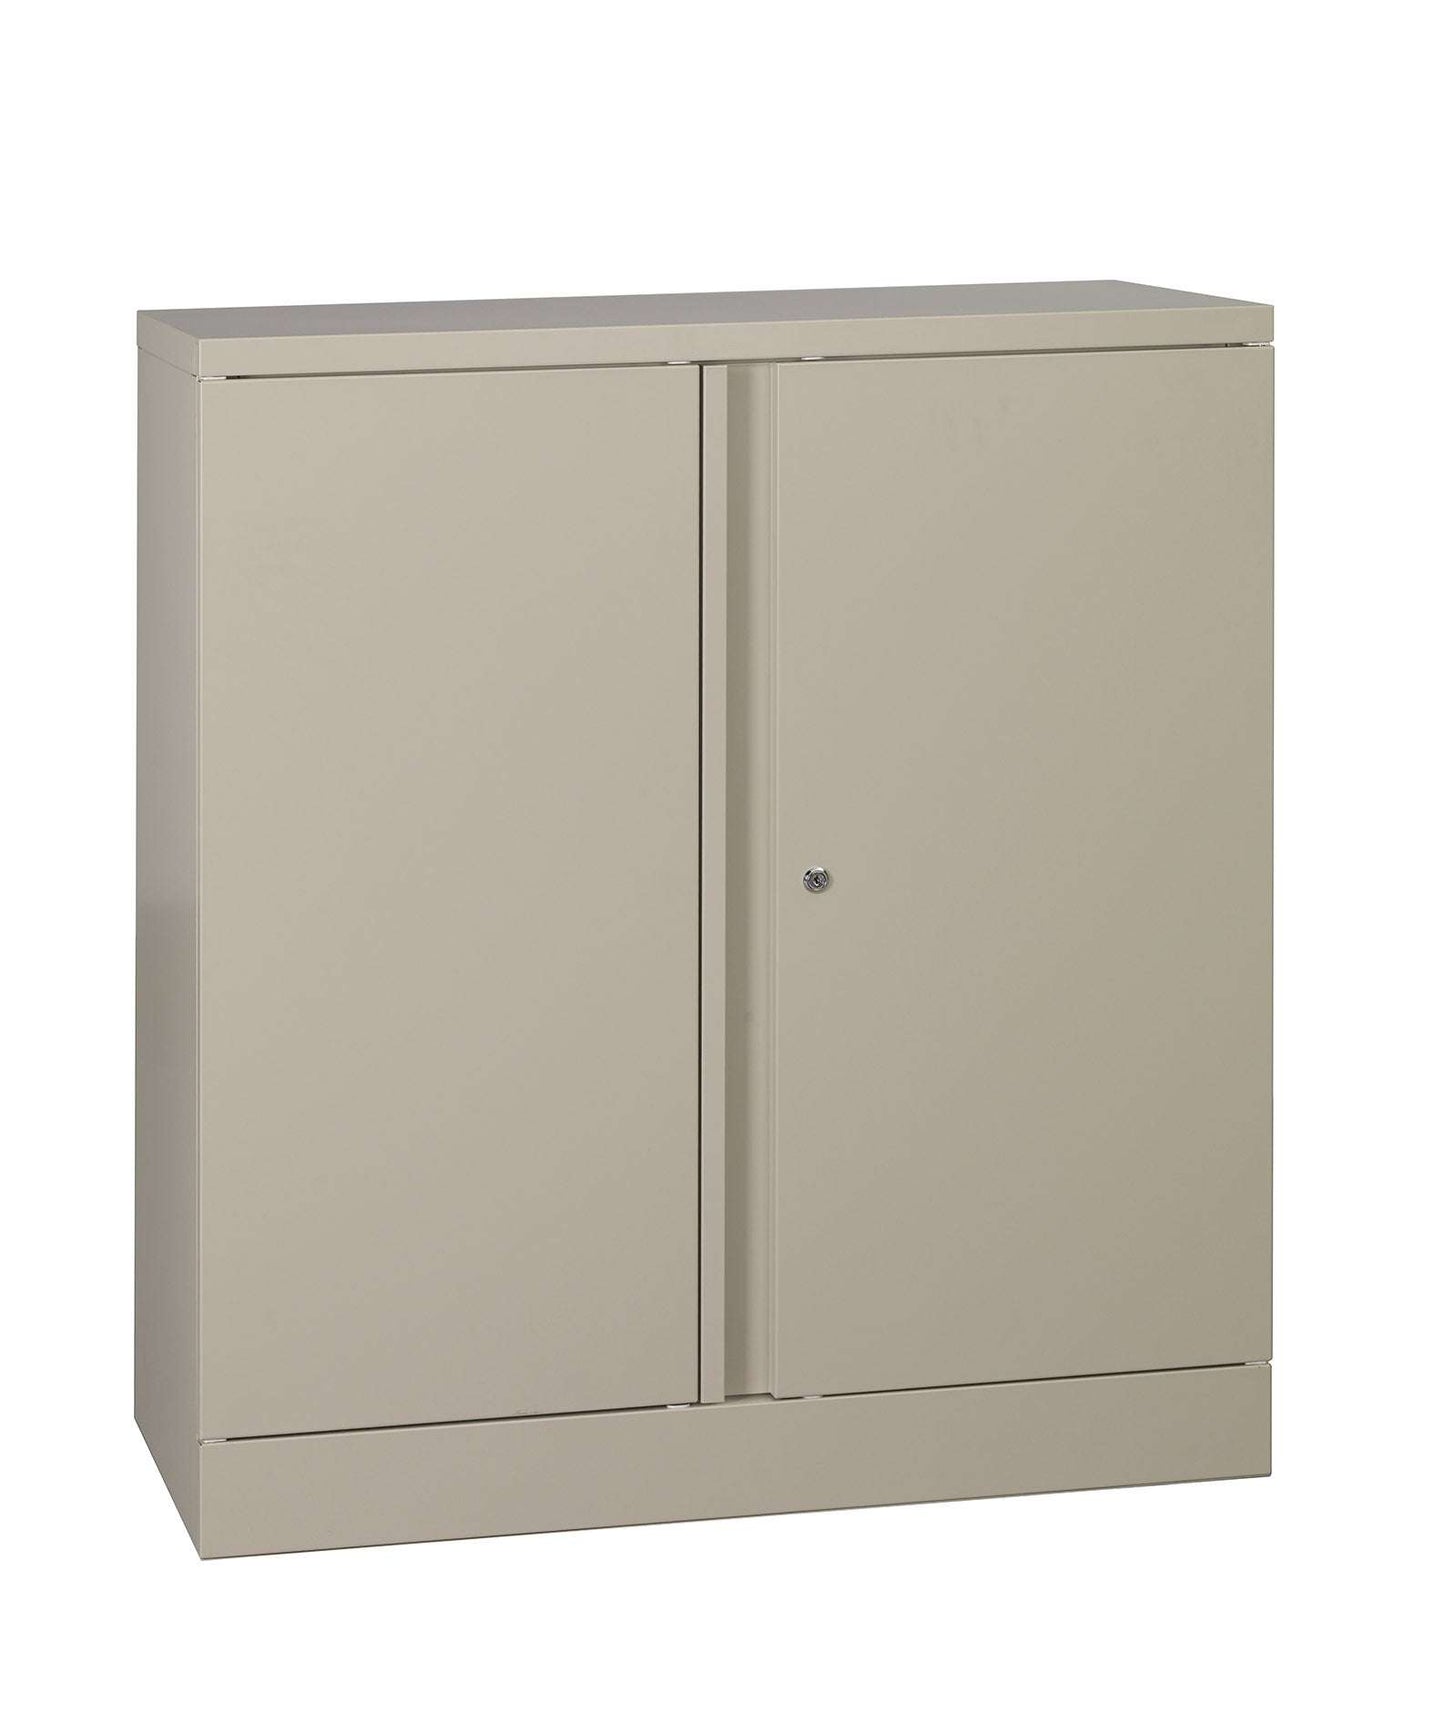 New 42"H Small Metal Storage Cabinet by Office Star